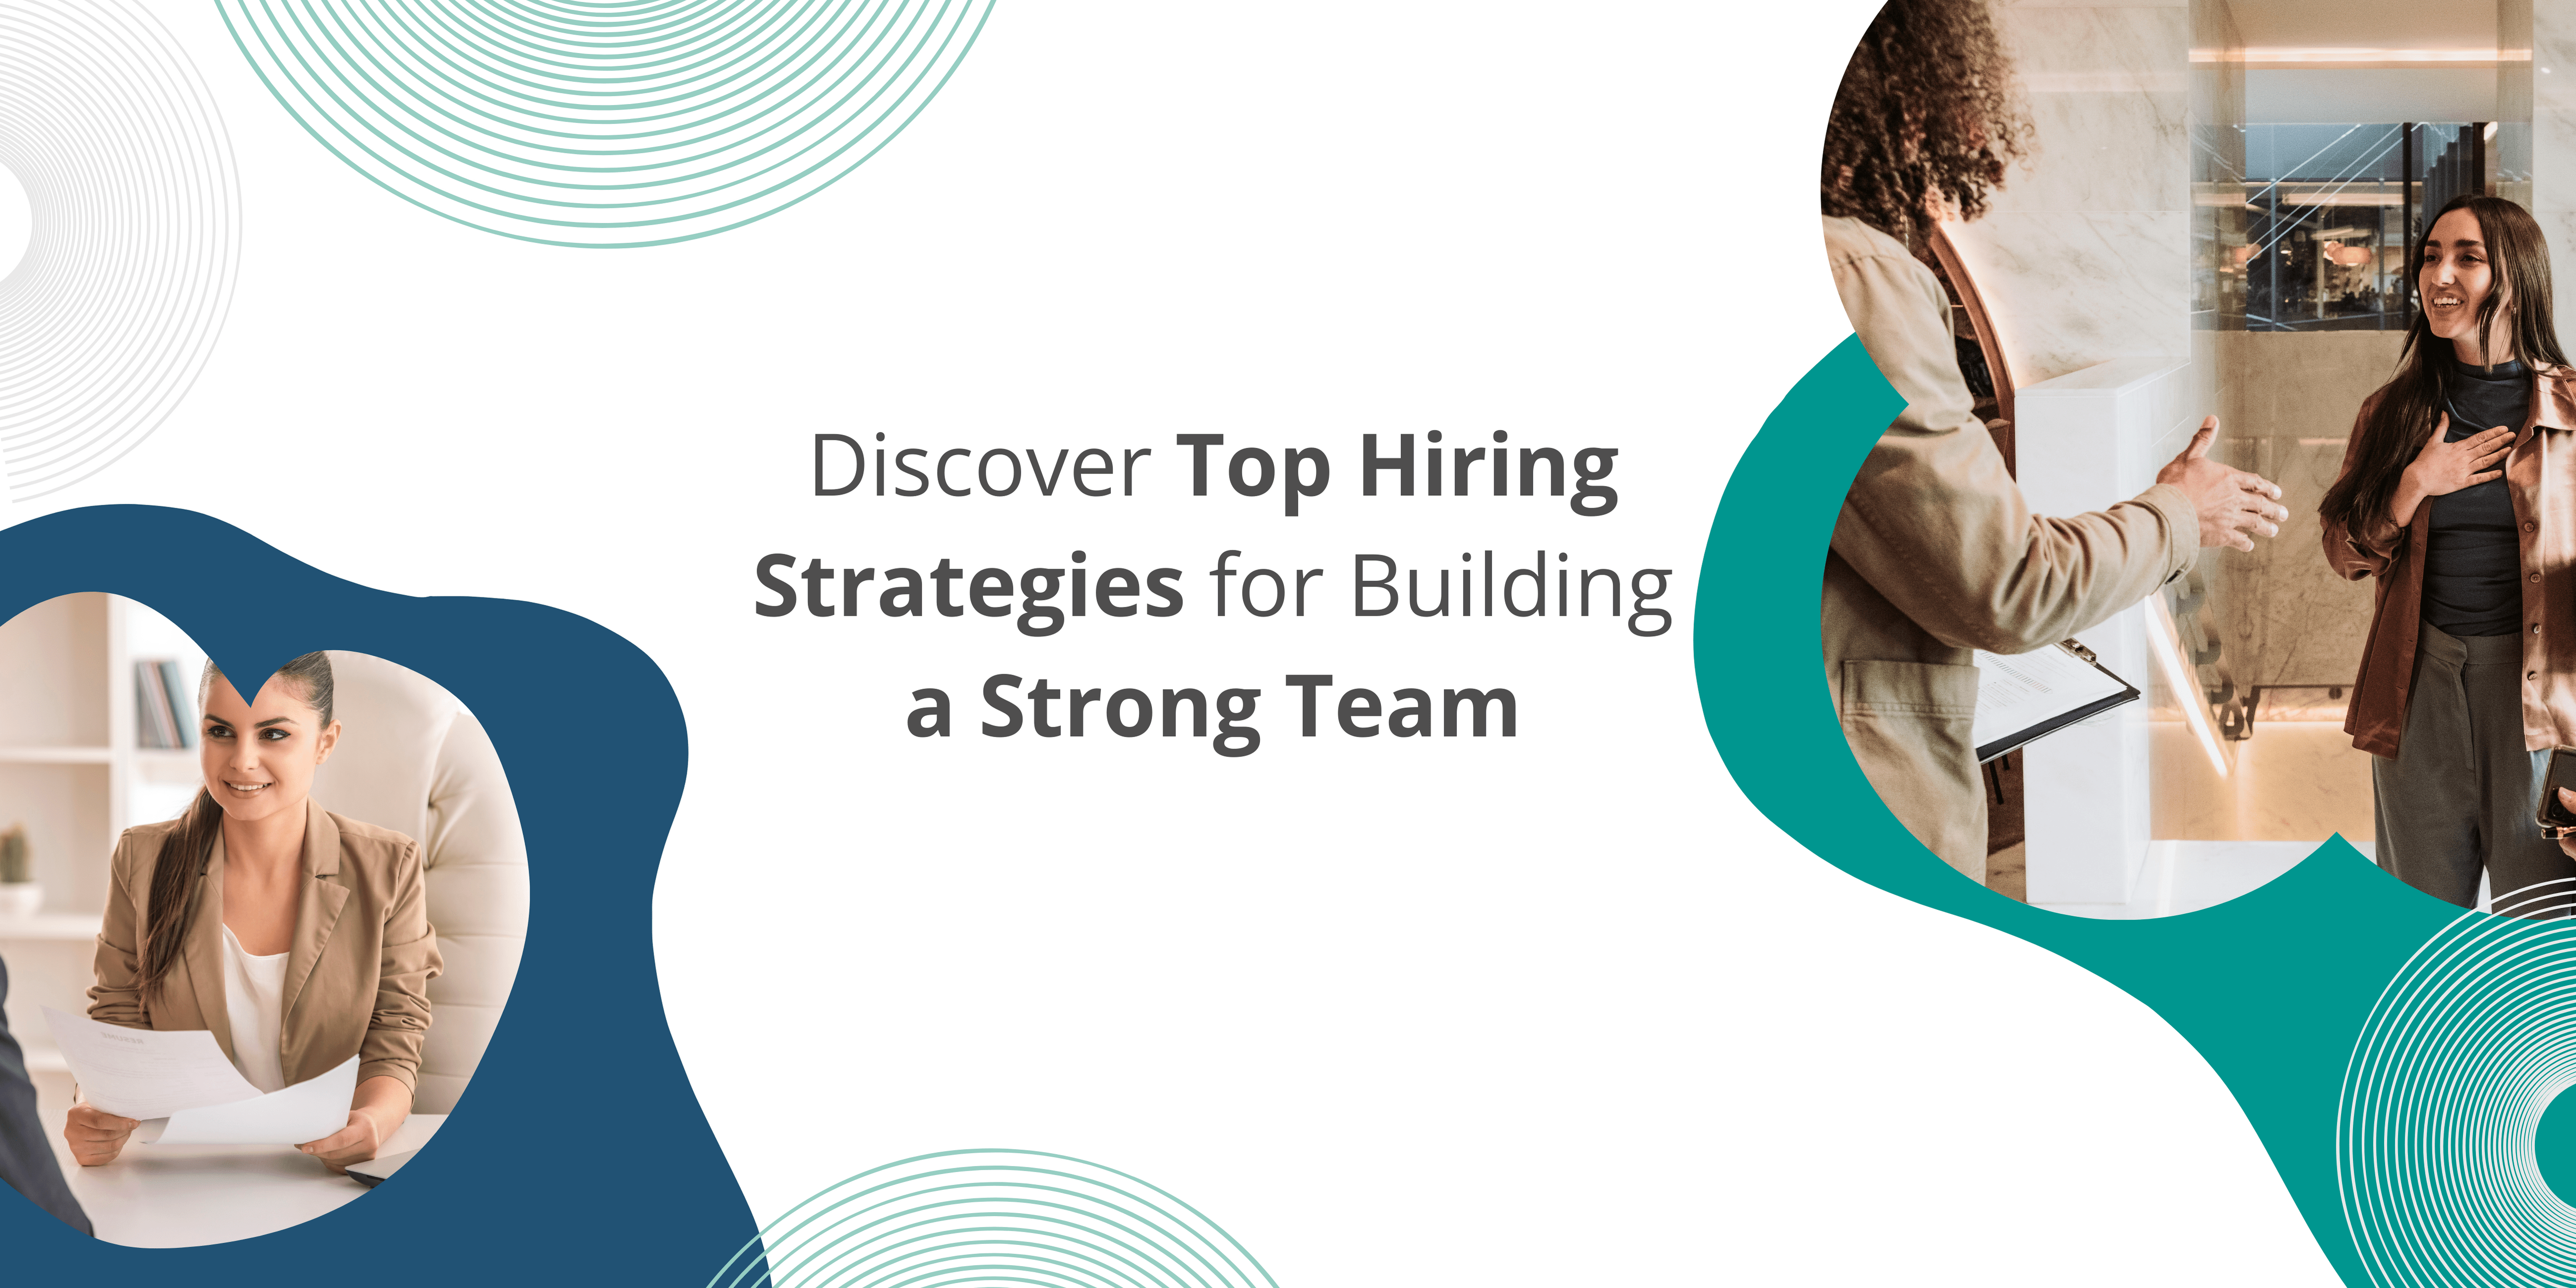 Discover Top Hiring Strategies for Building a Strong Team